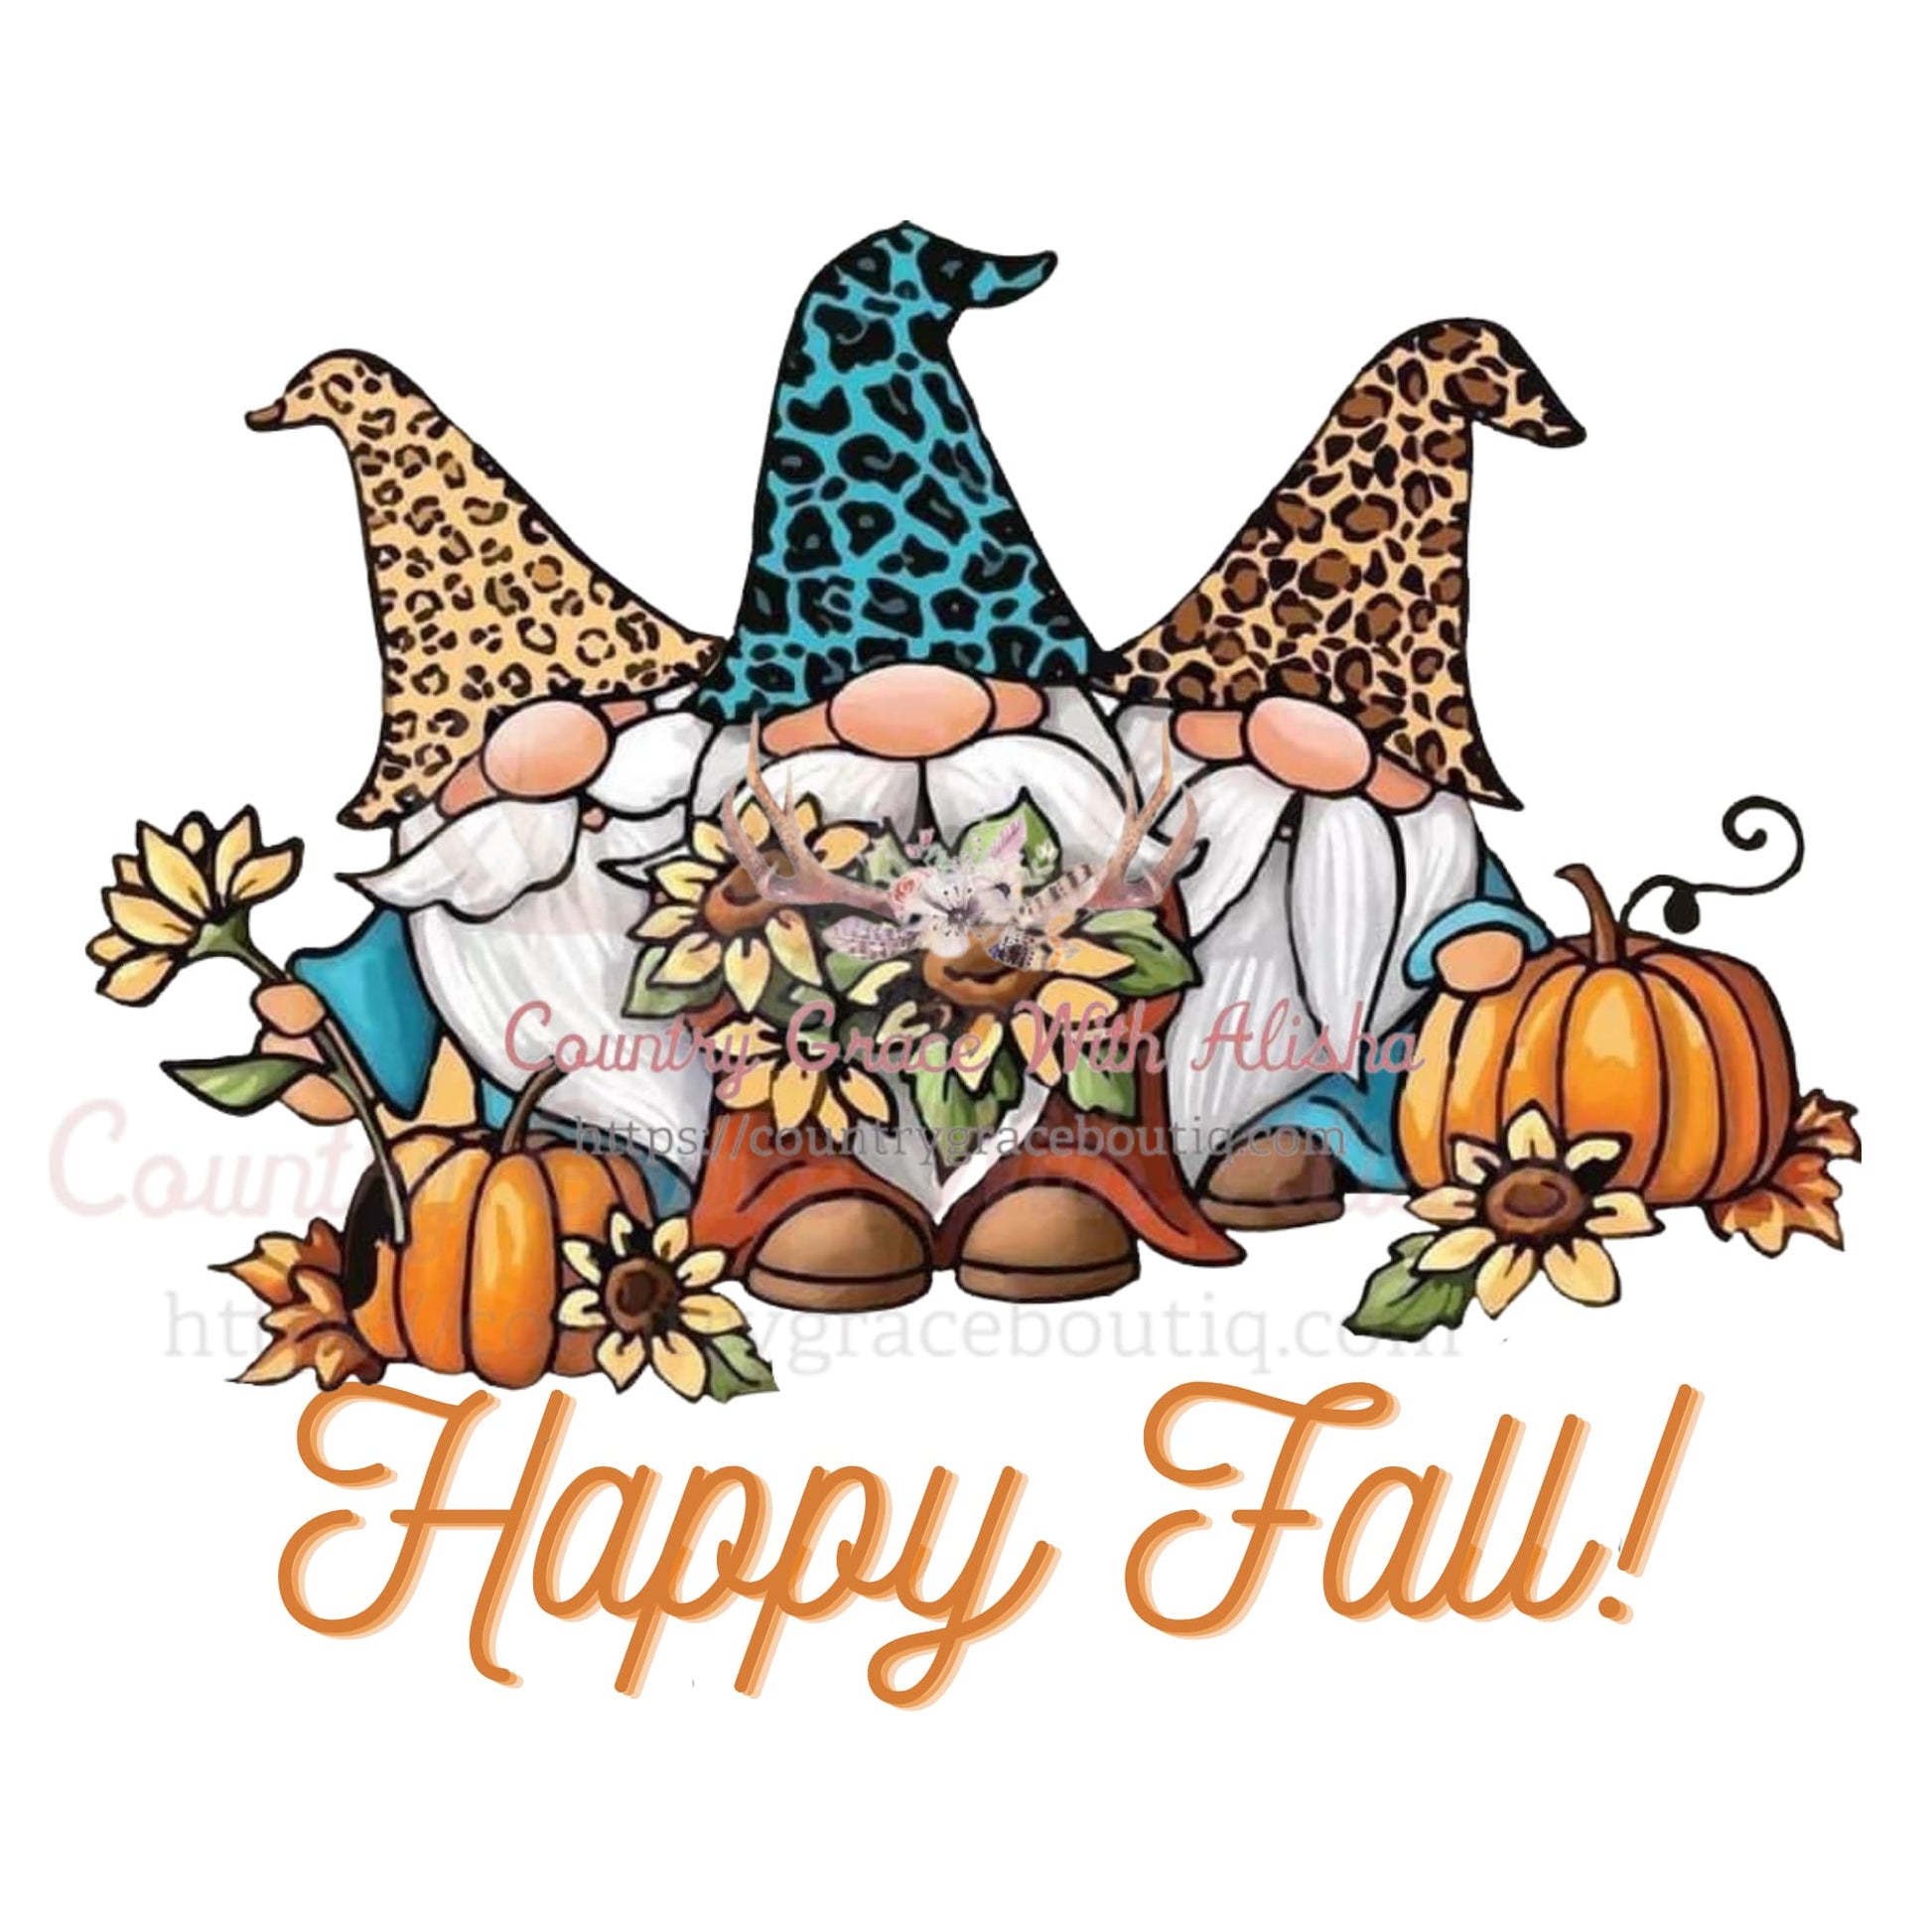 Gnome Happy Fall Sublimation Transfer - Sub $1.50 Country 